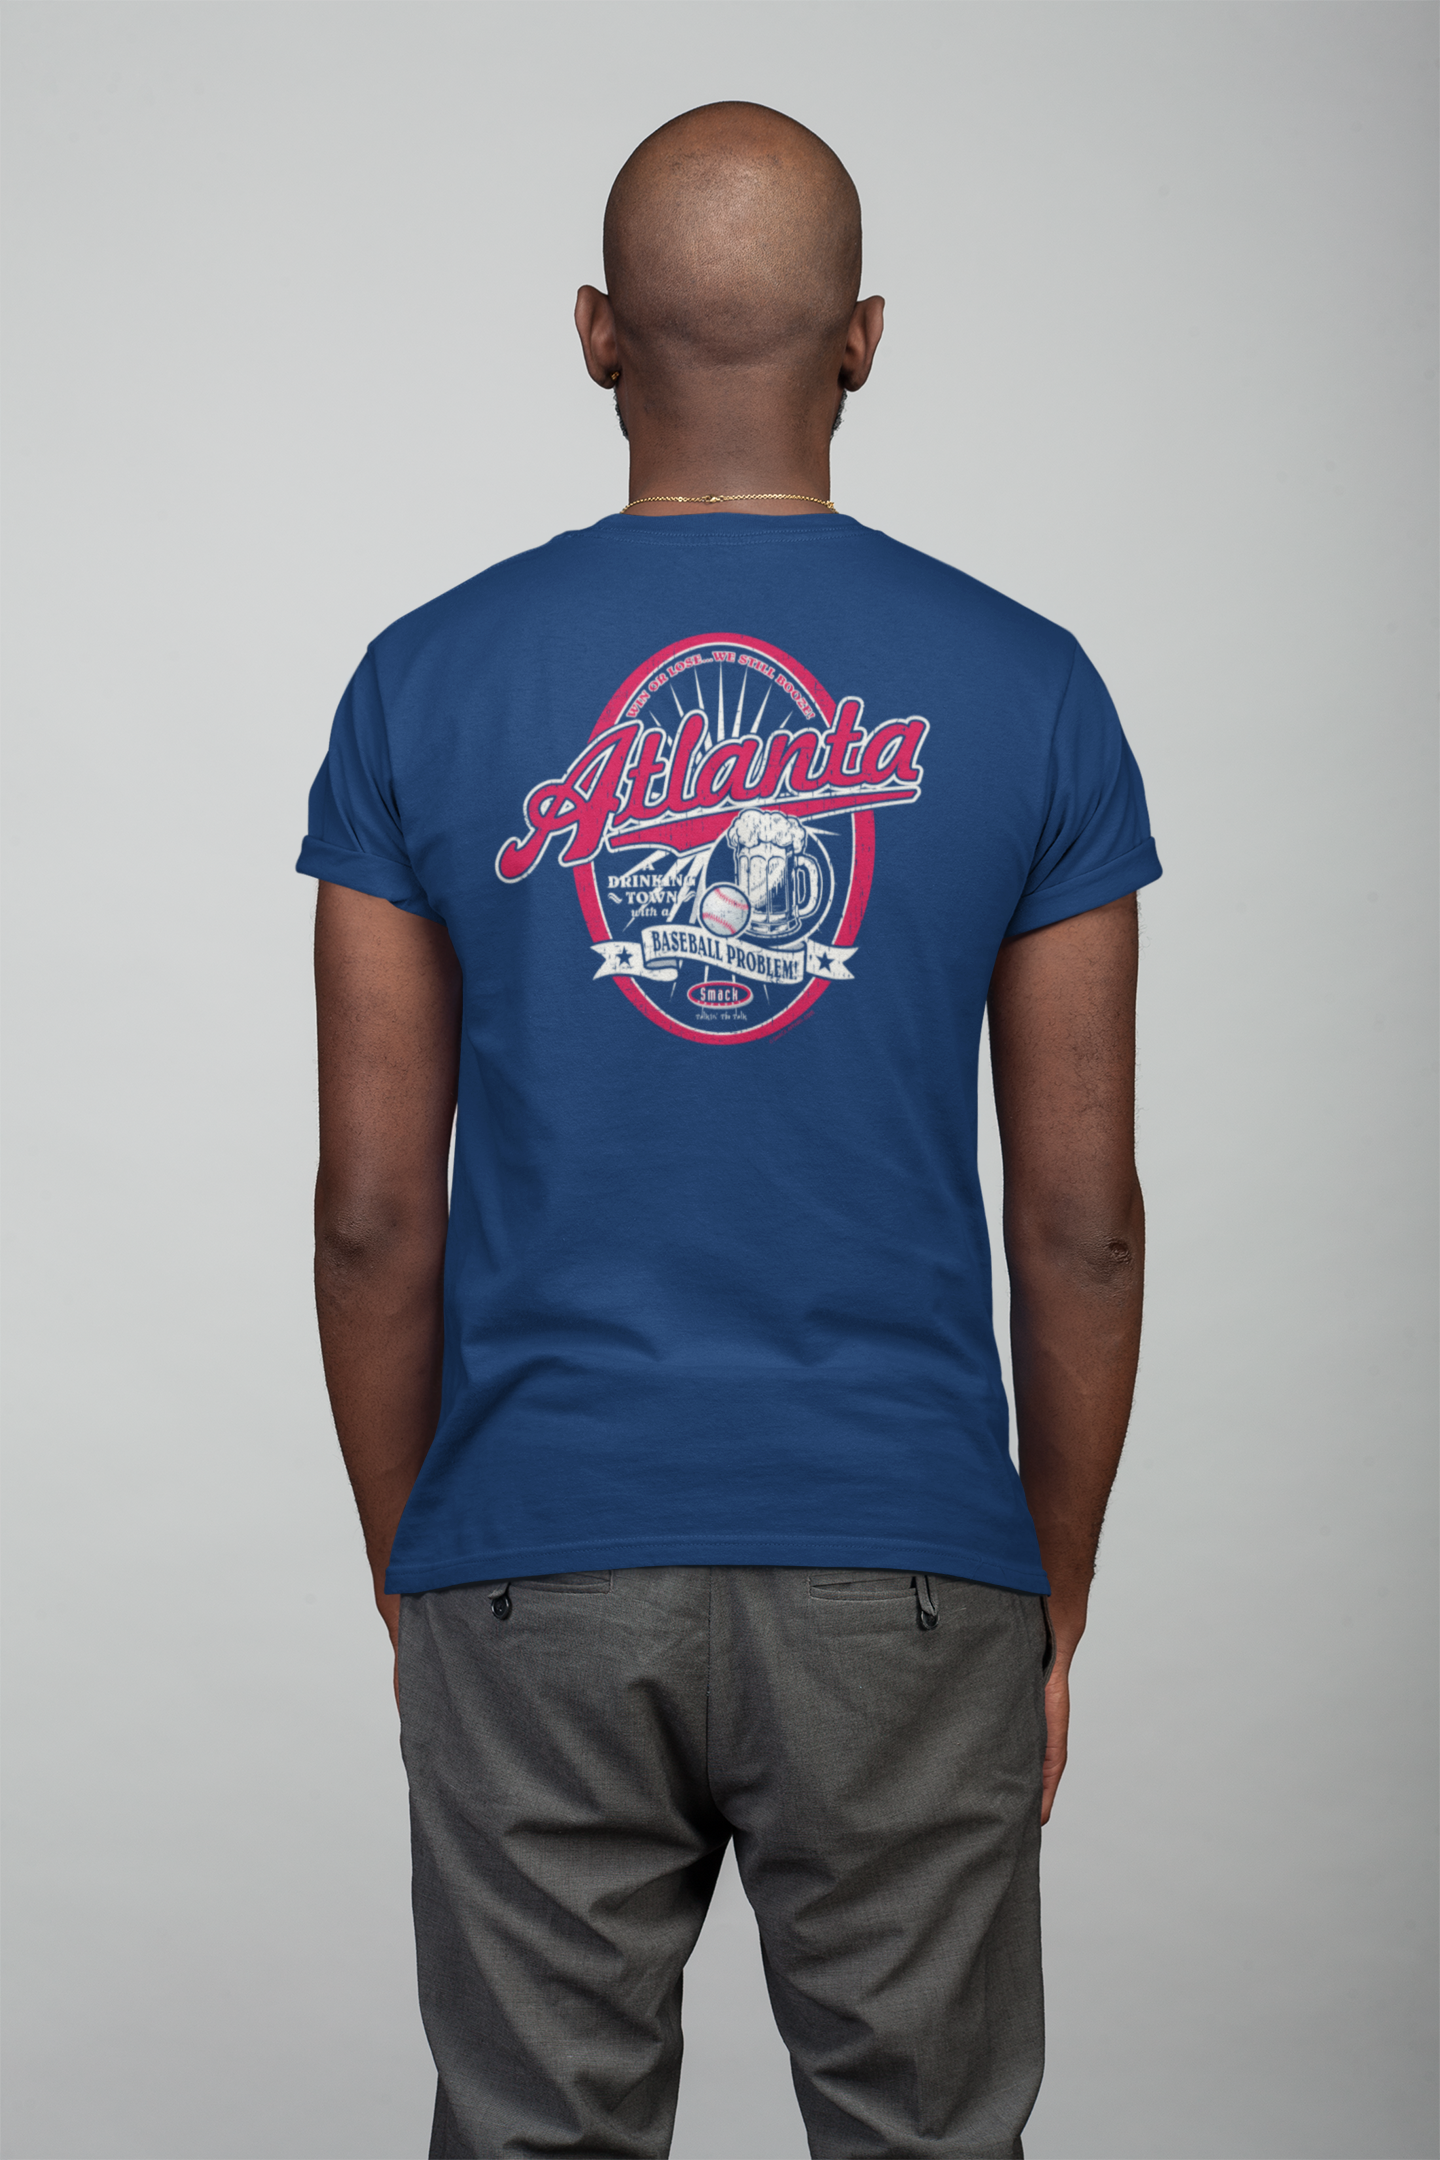 St. Louis Pro Baseball Apparel  St. Louis a Drinking Town with a